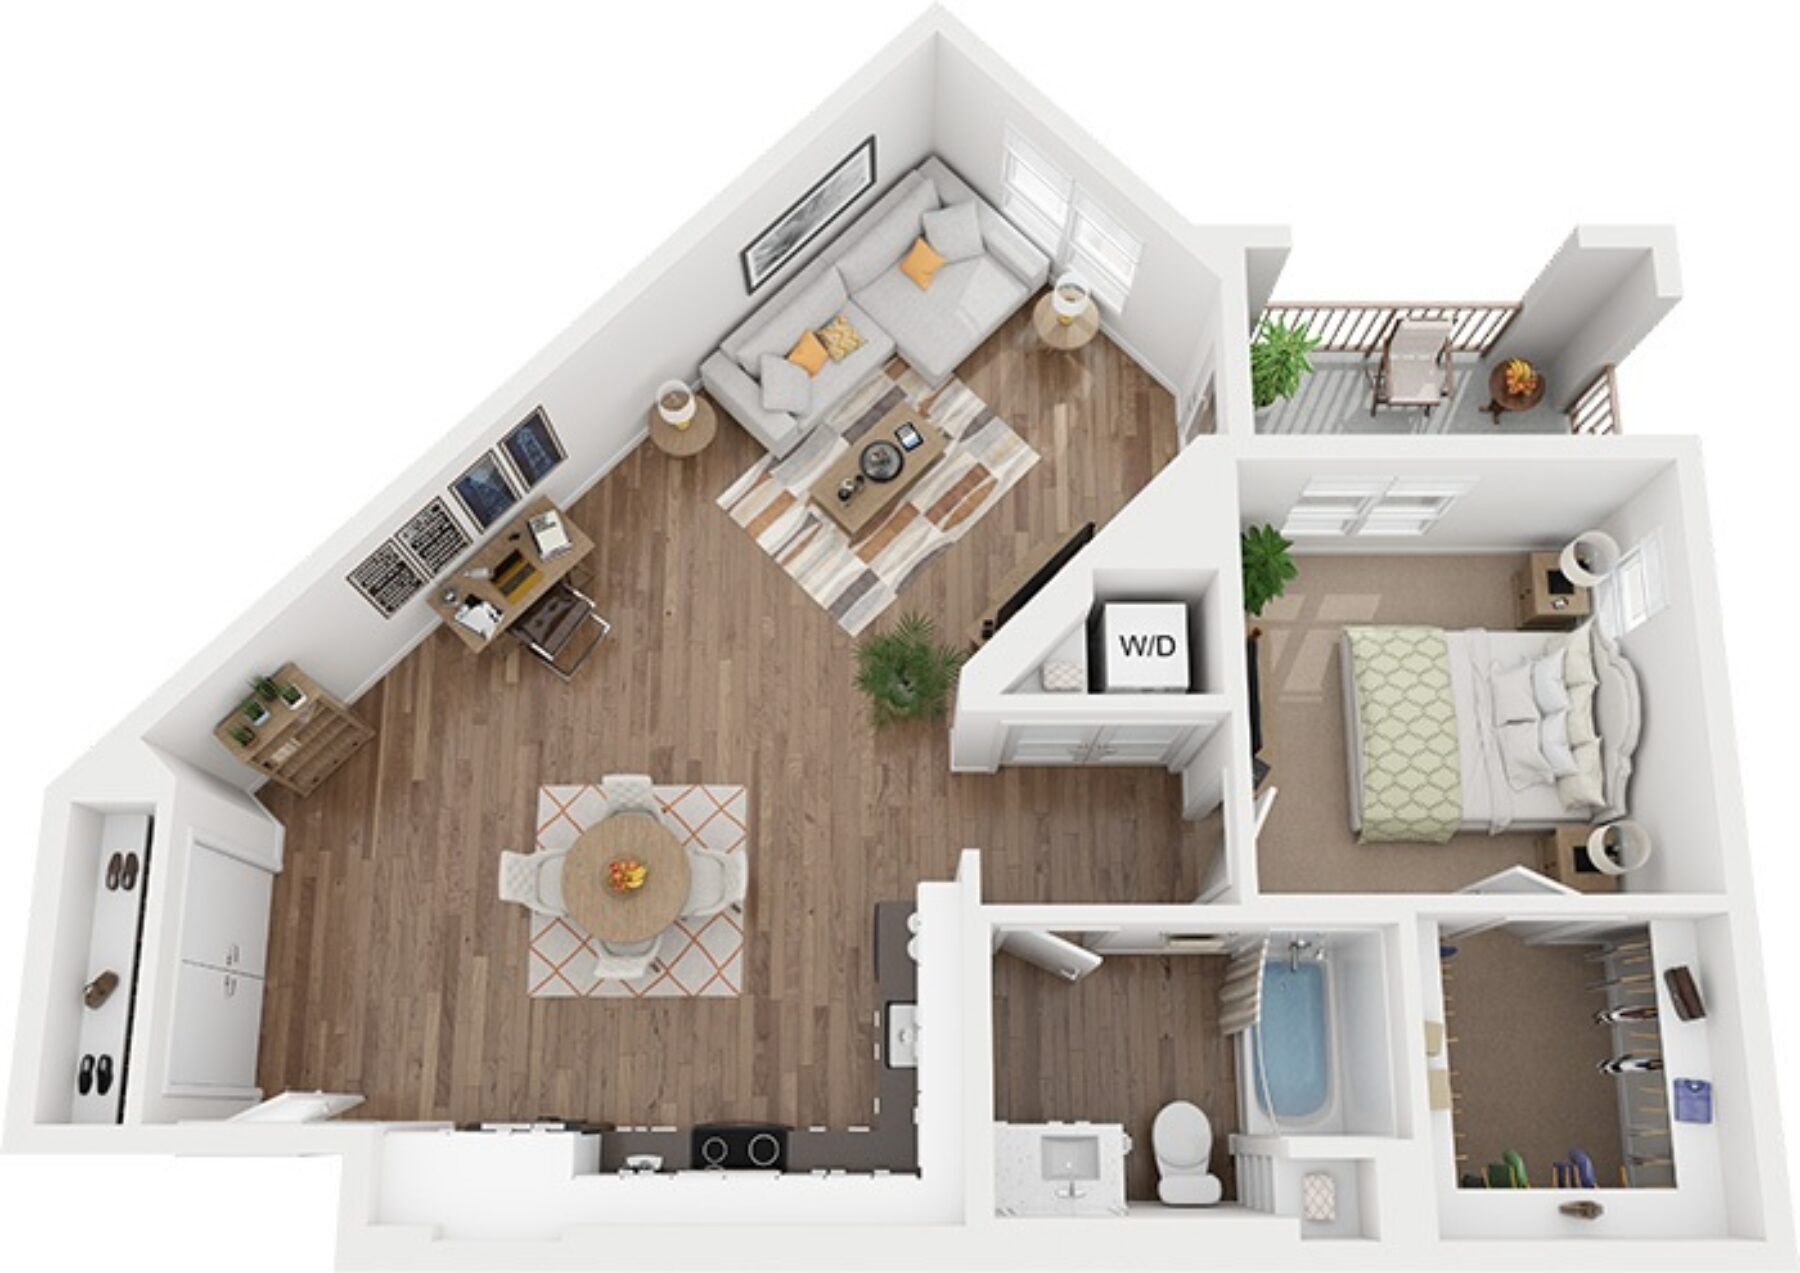 Plan Image: A3 - One Bedroom